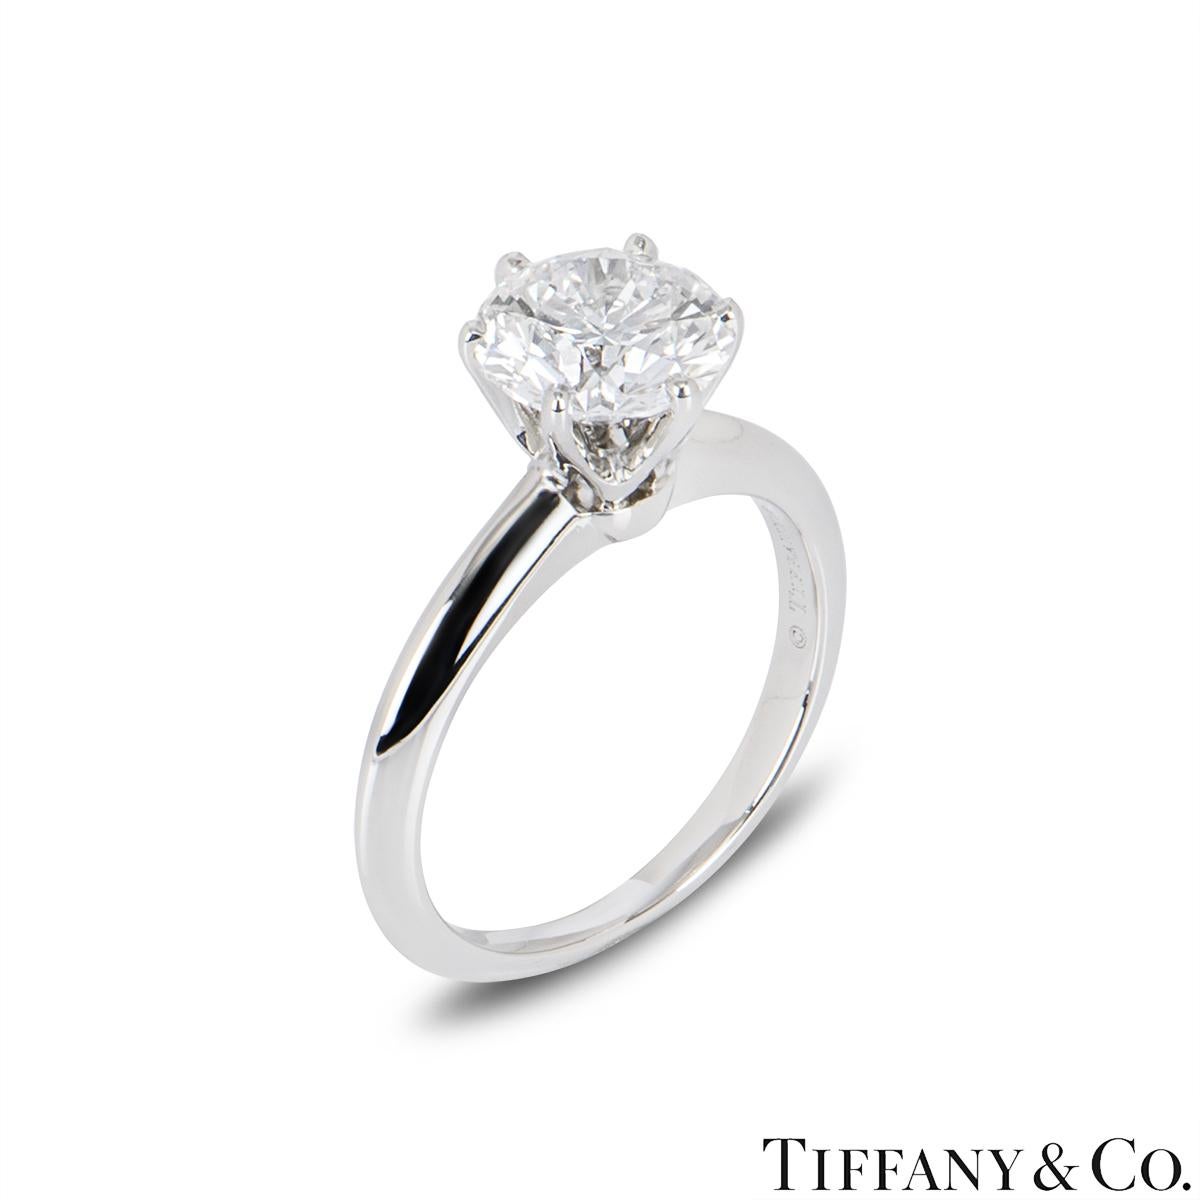 A stunning platinum diamond ring by Tiffany & Co. from the Setting collection. The ring comprises of a round brilliant cut diamond in a 6 claw setting with a weight of 1.52ct, D colour and VS2 clarity. The ring is a size UK I & US 4.5 but can be